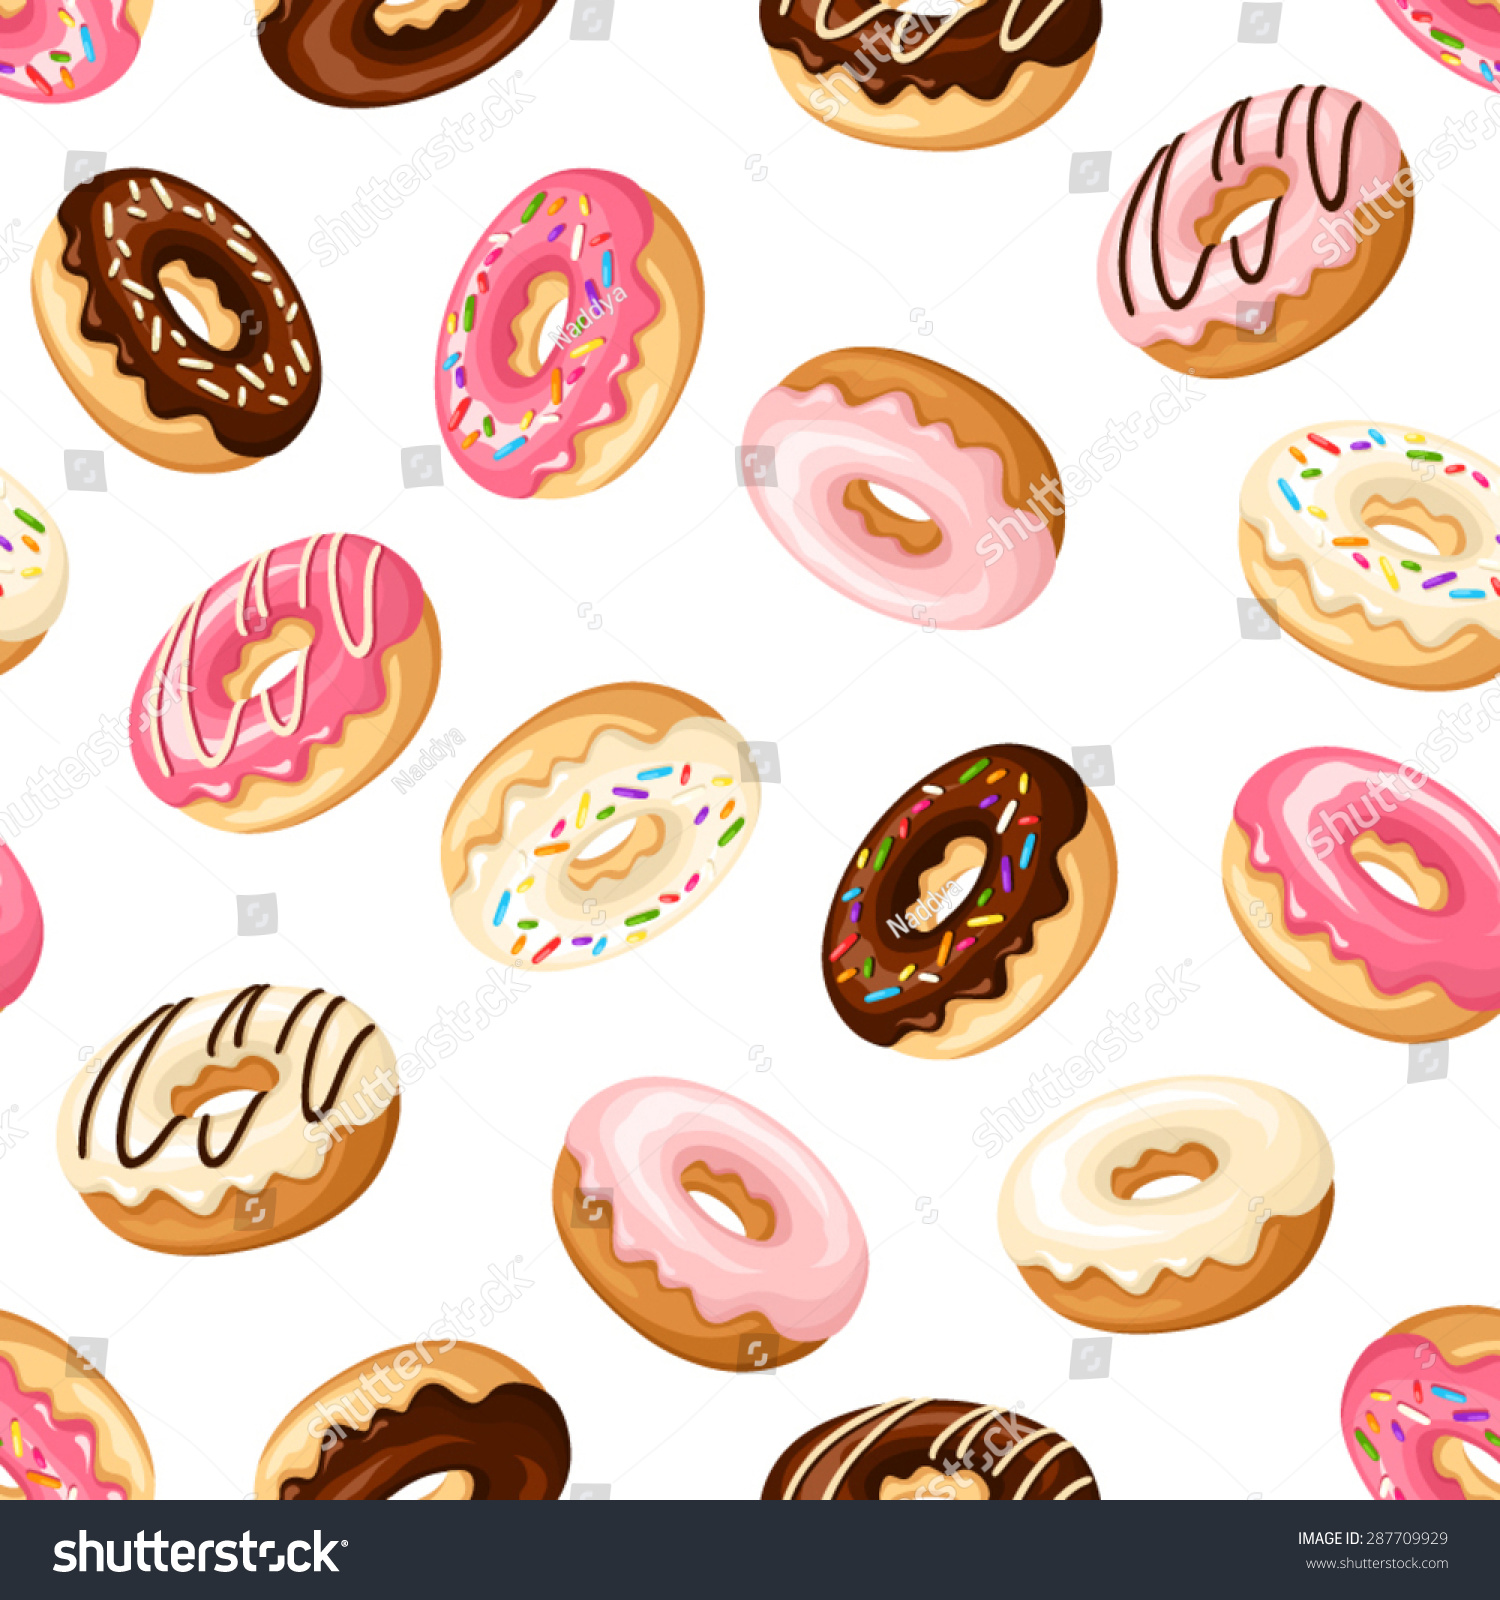 Vector Seamless Pattern With Colorful Donuts With Glaze And Sprinkles On A White Background 0692